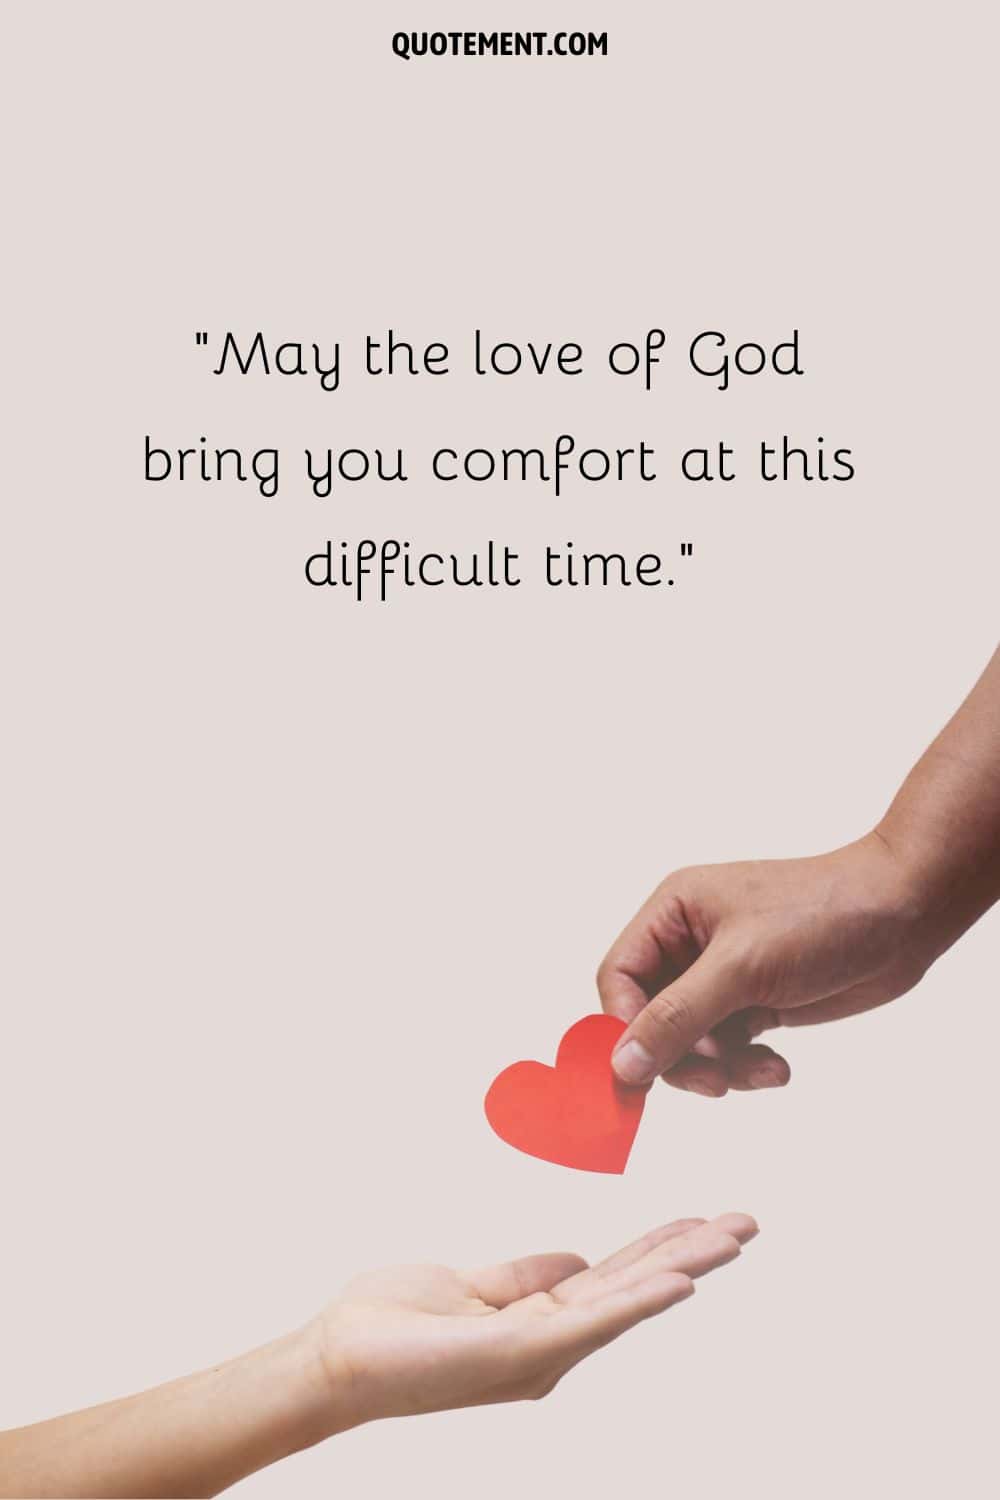 May the love of God bring you comfort at this difficult time.